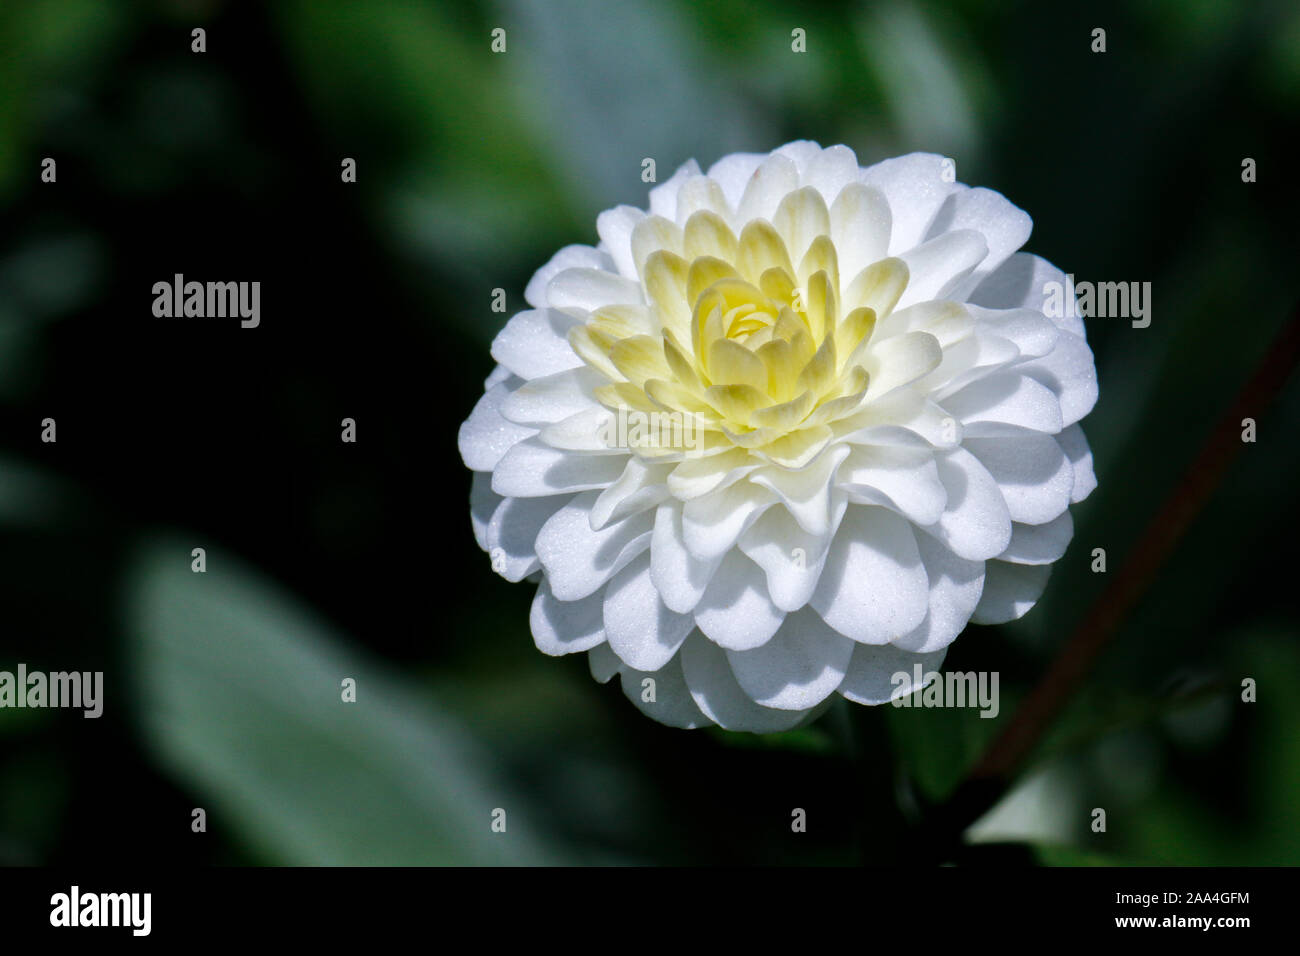 Close up of single white flower of Ranunculus aconitifolius (Batchelor's buttons) Stock Photo